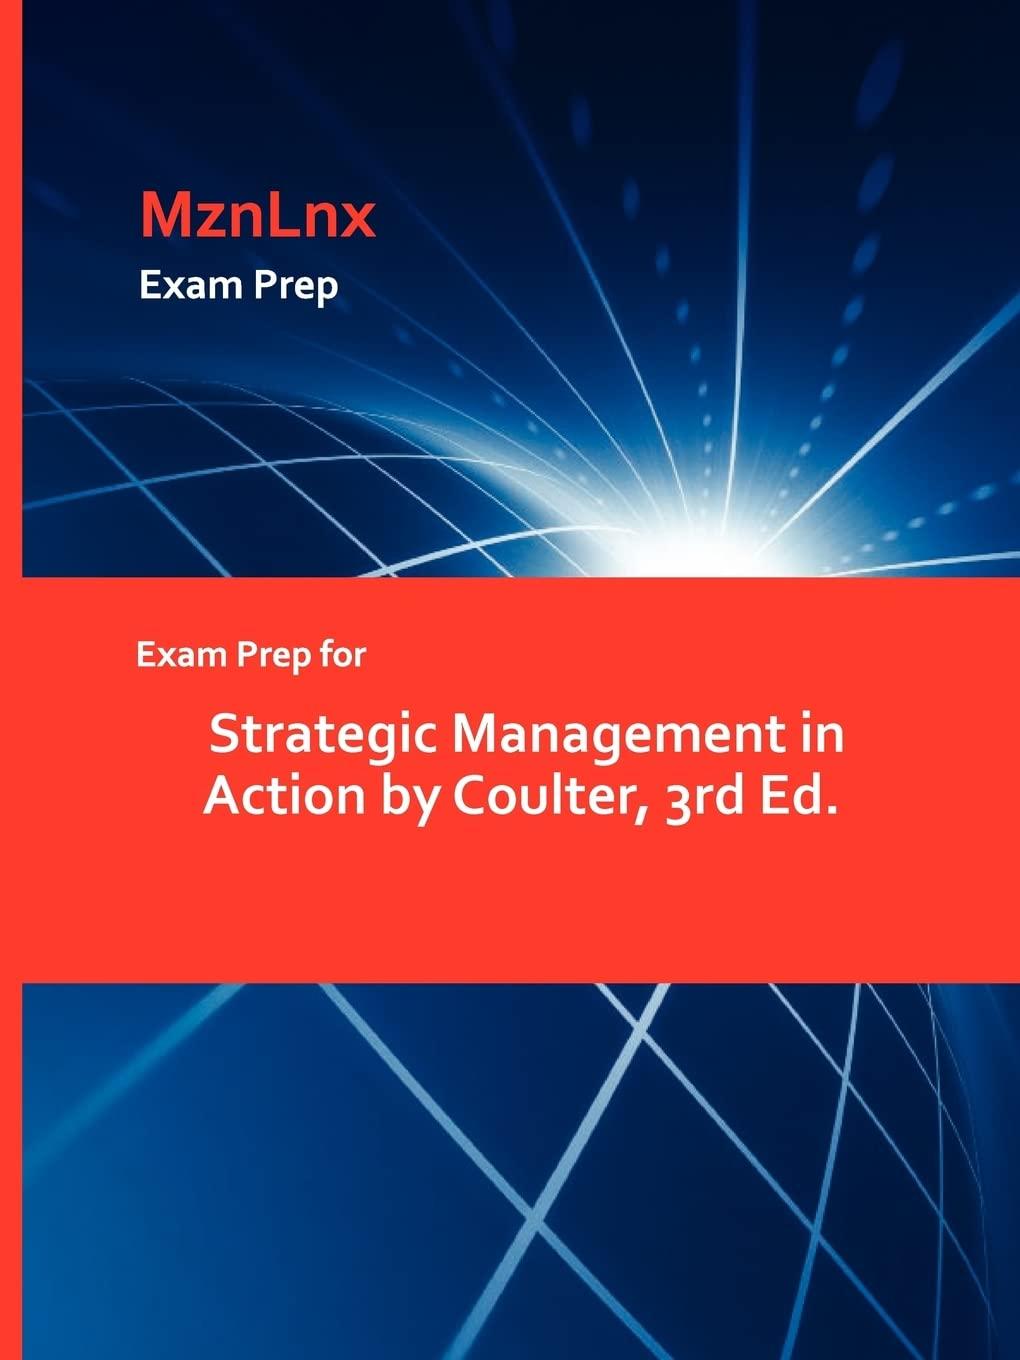 exam prep for strategic management in action by coulter 3rd edition mznlnx 1428871535, 978-1428871533